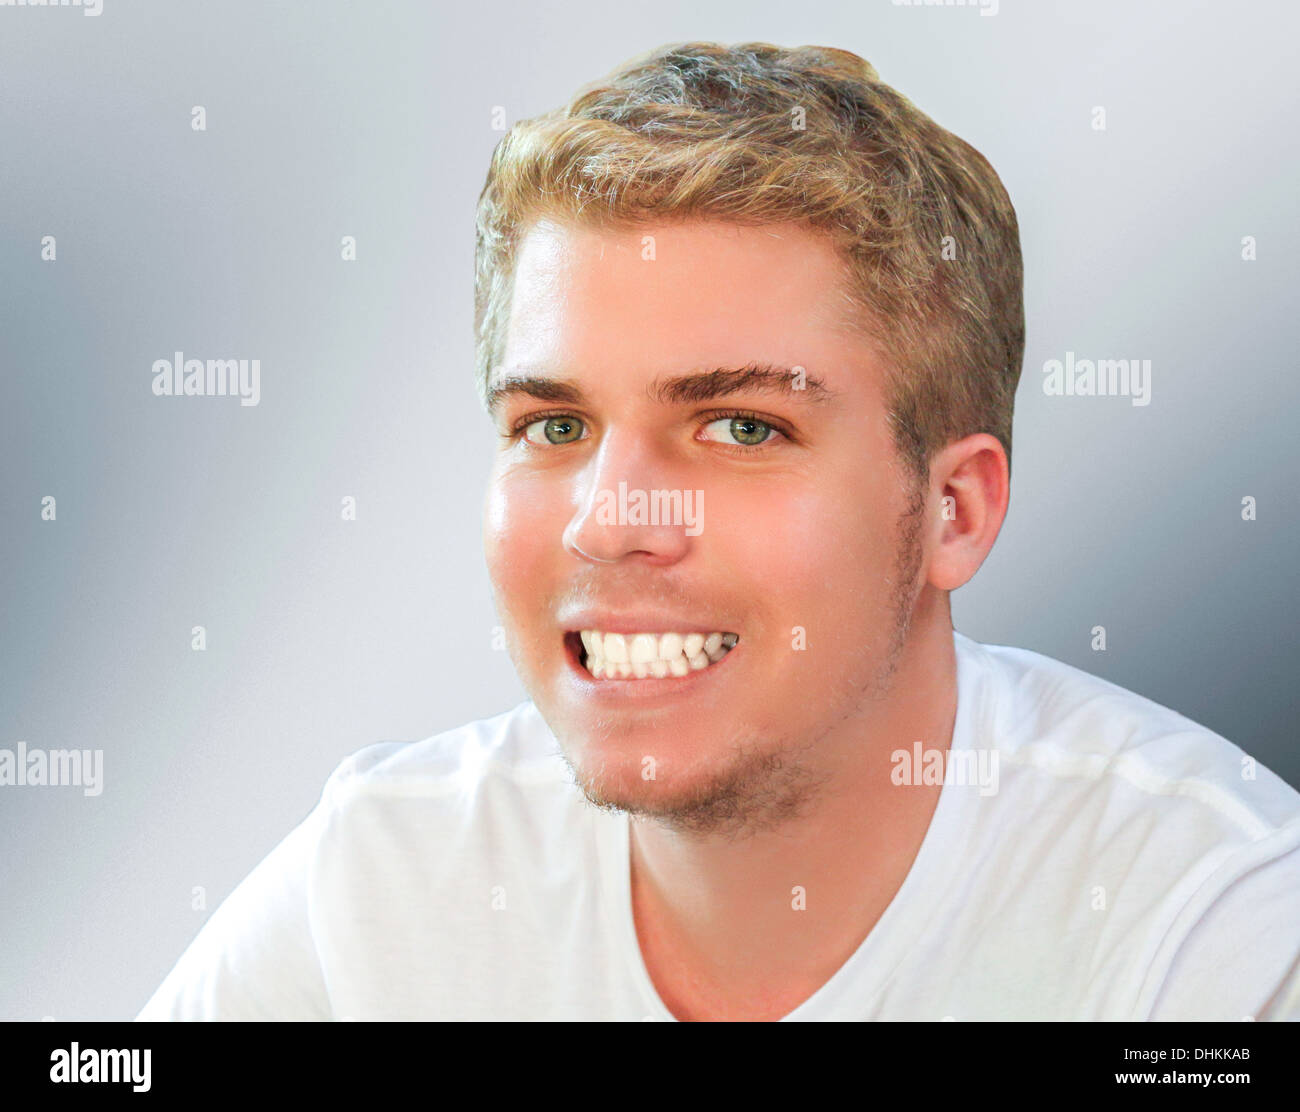 A young man showing his pearl white smile Stock Photo